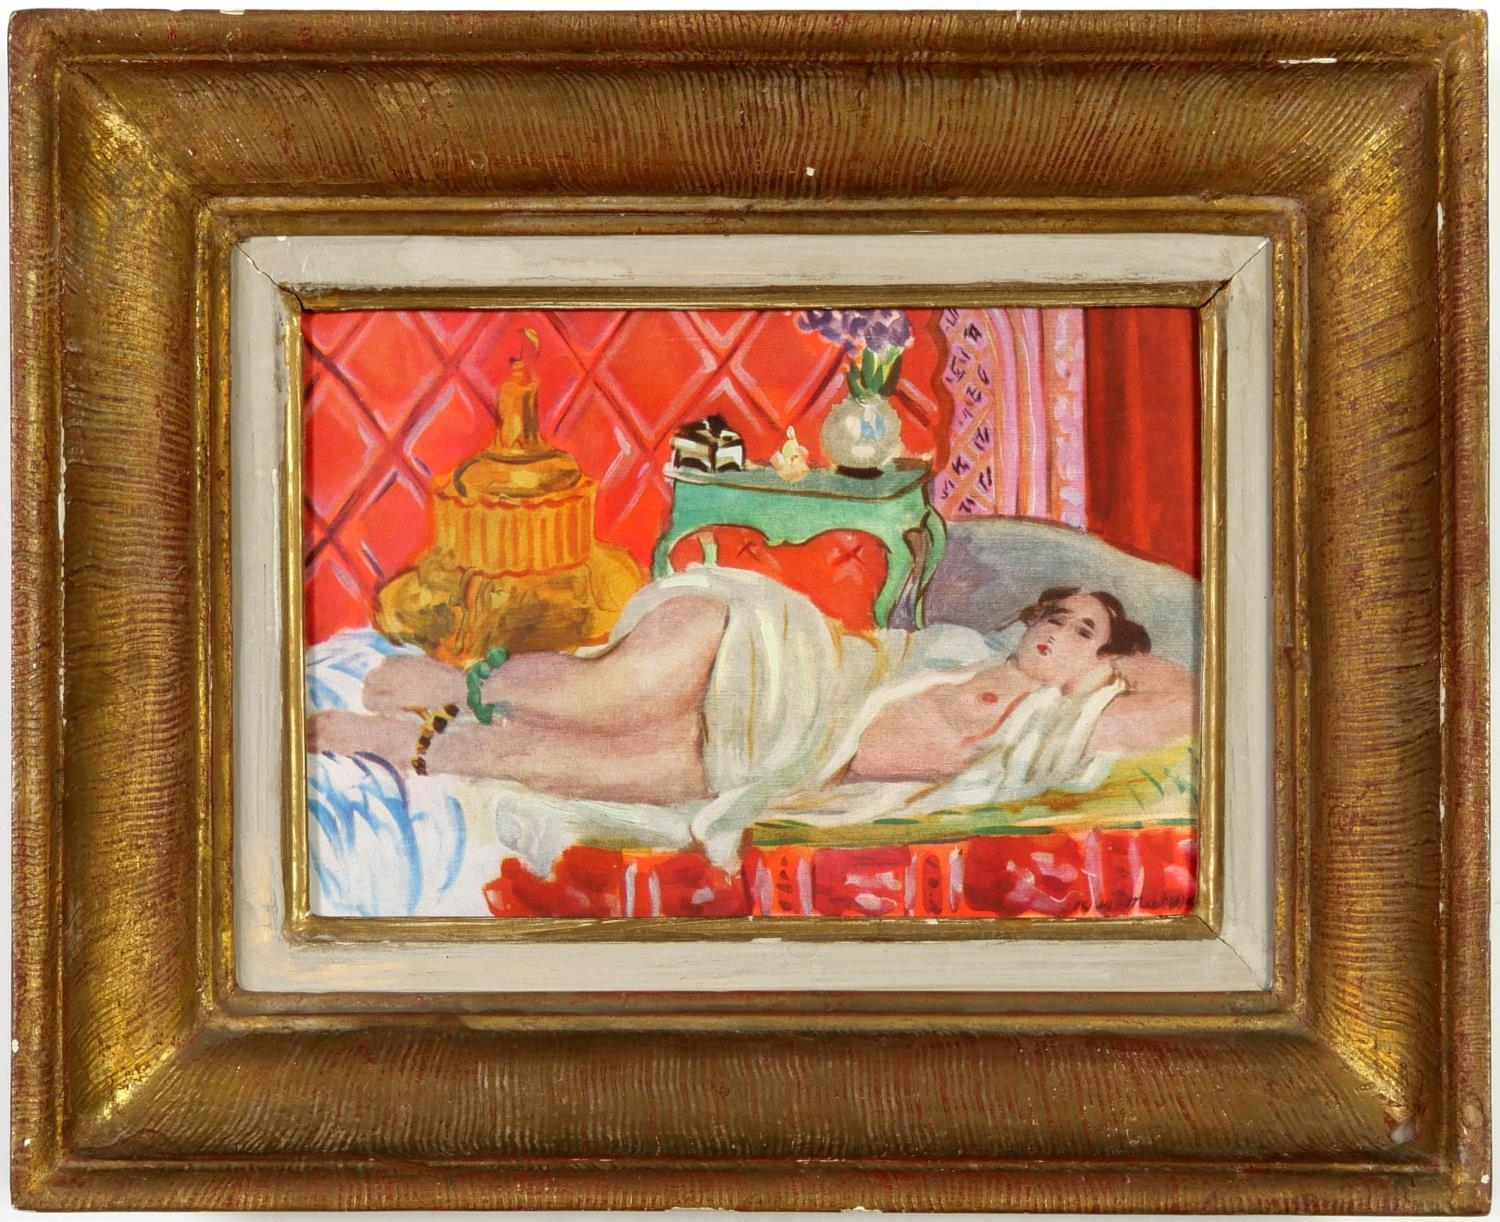 HENRI MATISSE, Odalisque, off set lithograph, signed in the plate, French vintage frame, 17cm x 25.